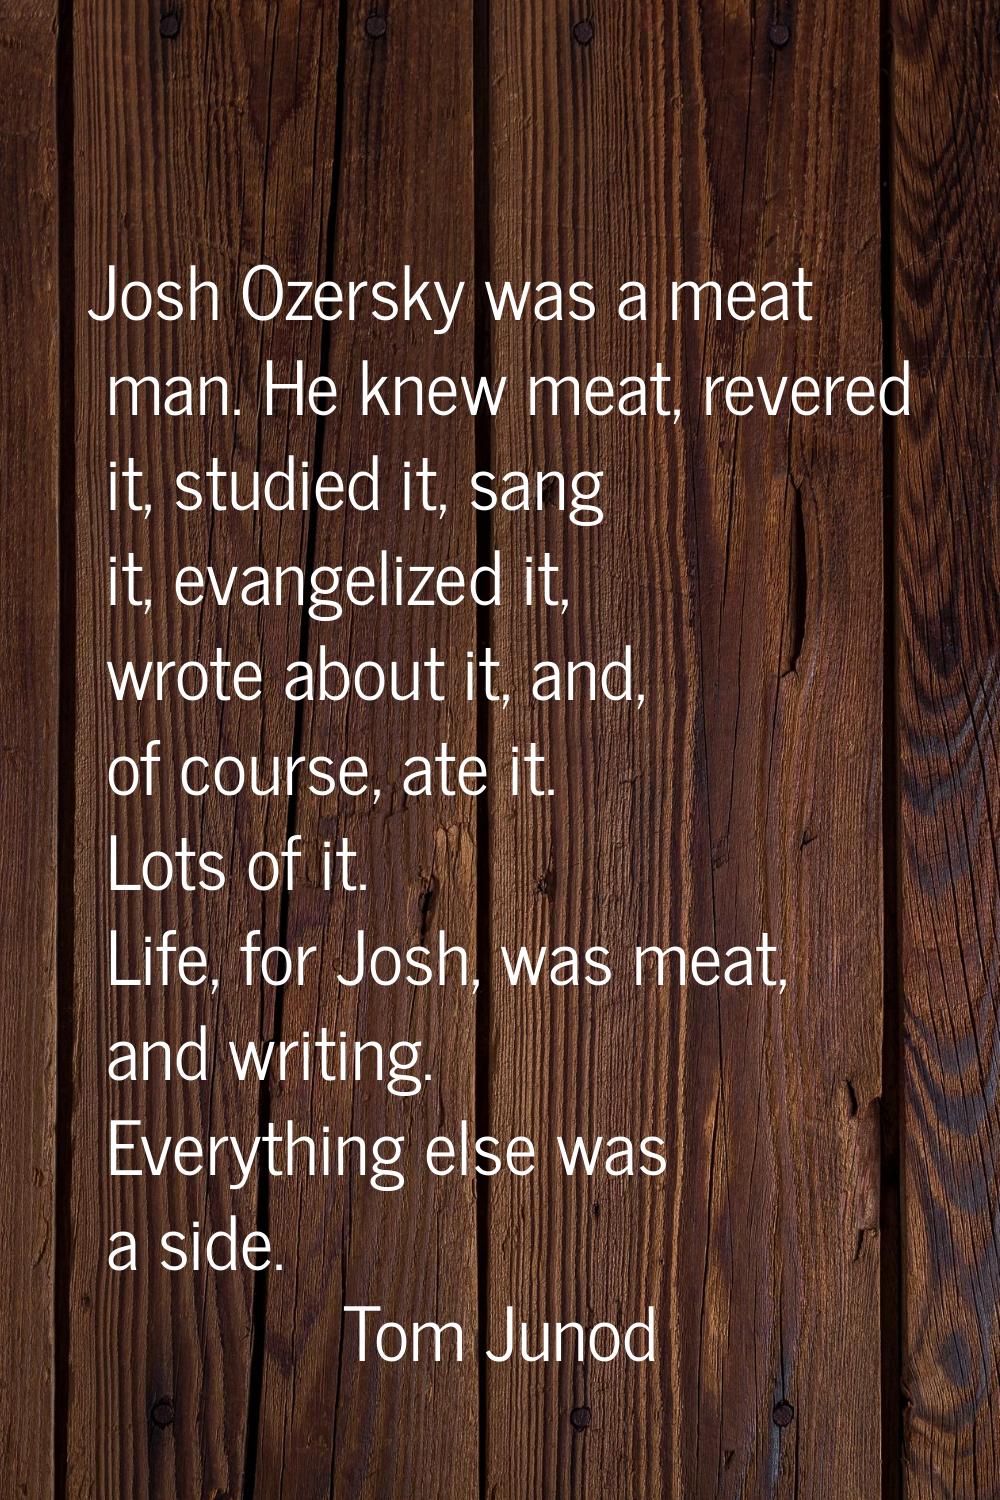 Josh Ozersky was a meat man. He knew meat, revered it, studied it, sang it, evangelized it, wrote a